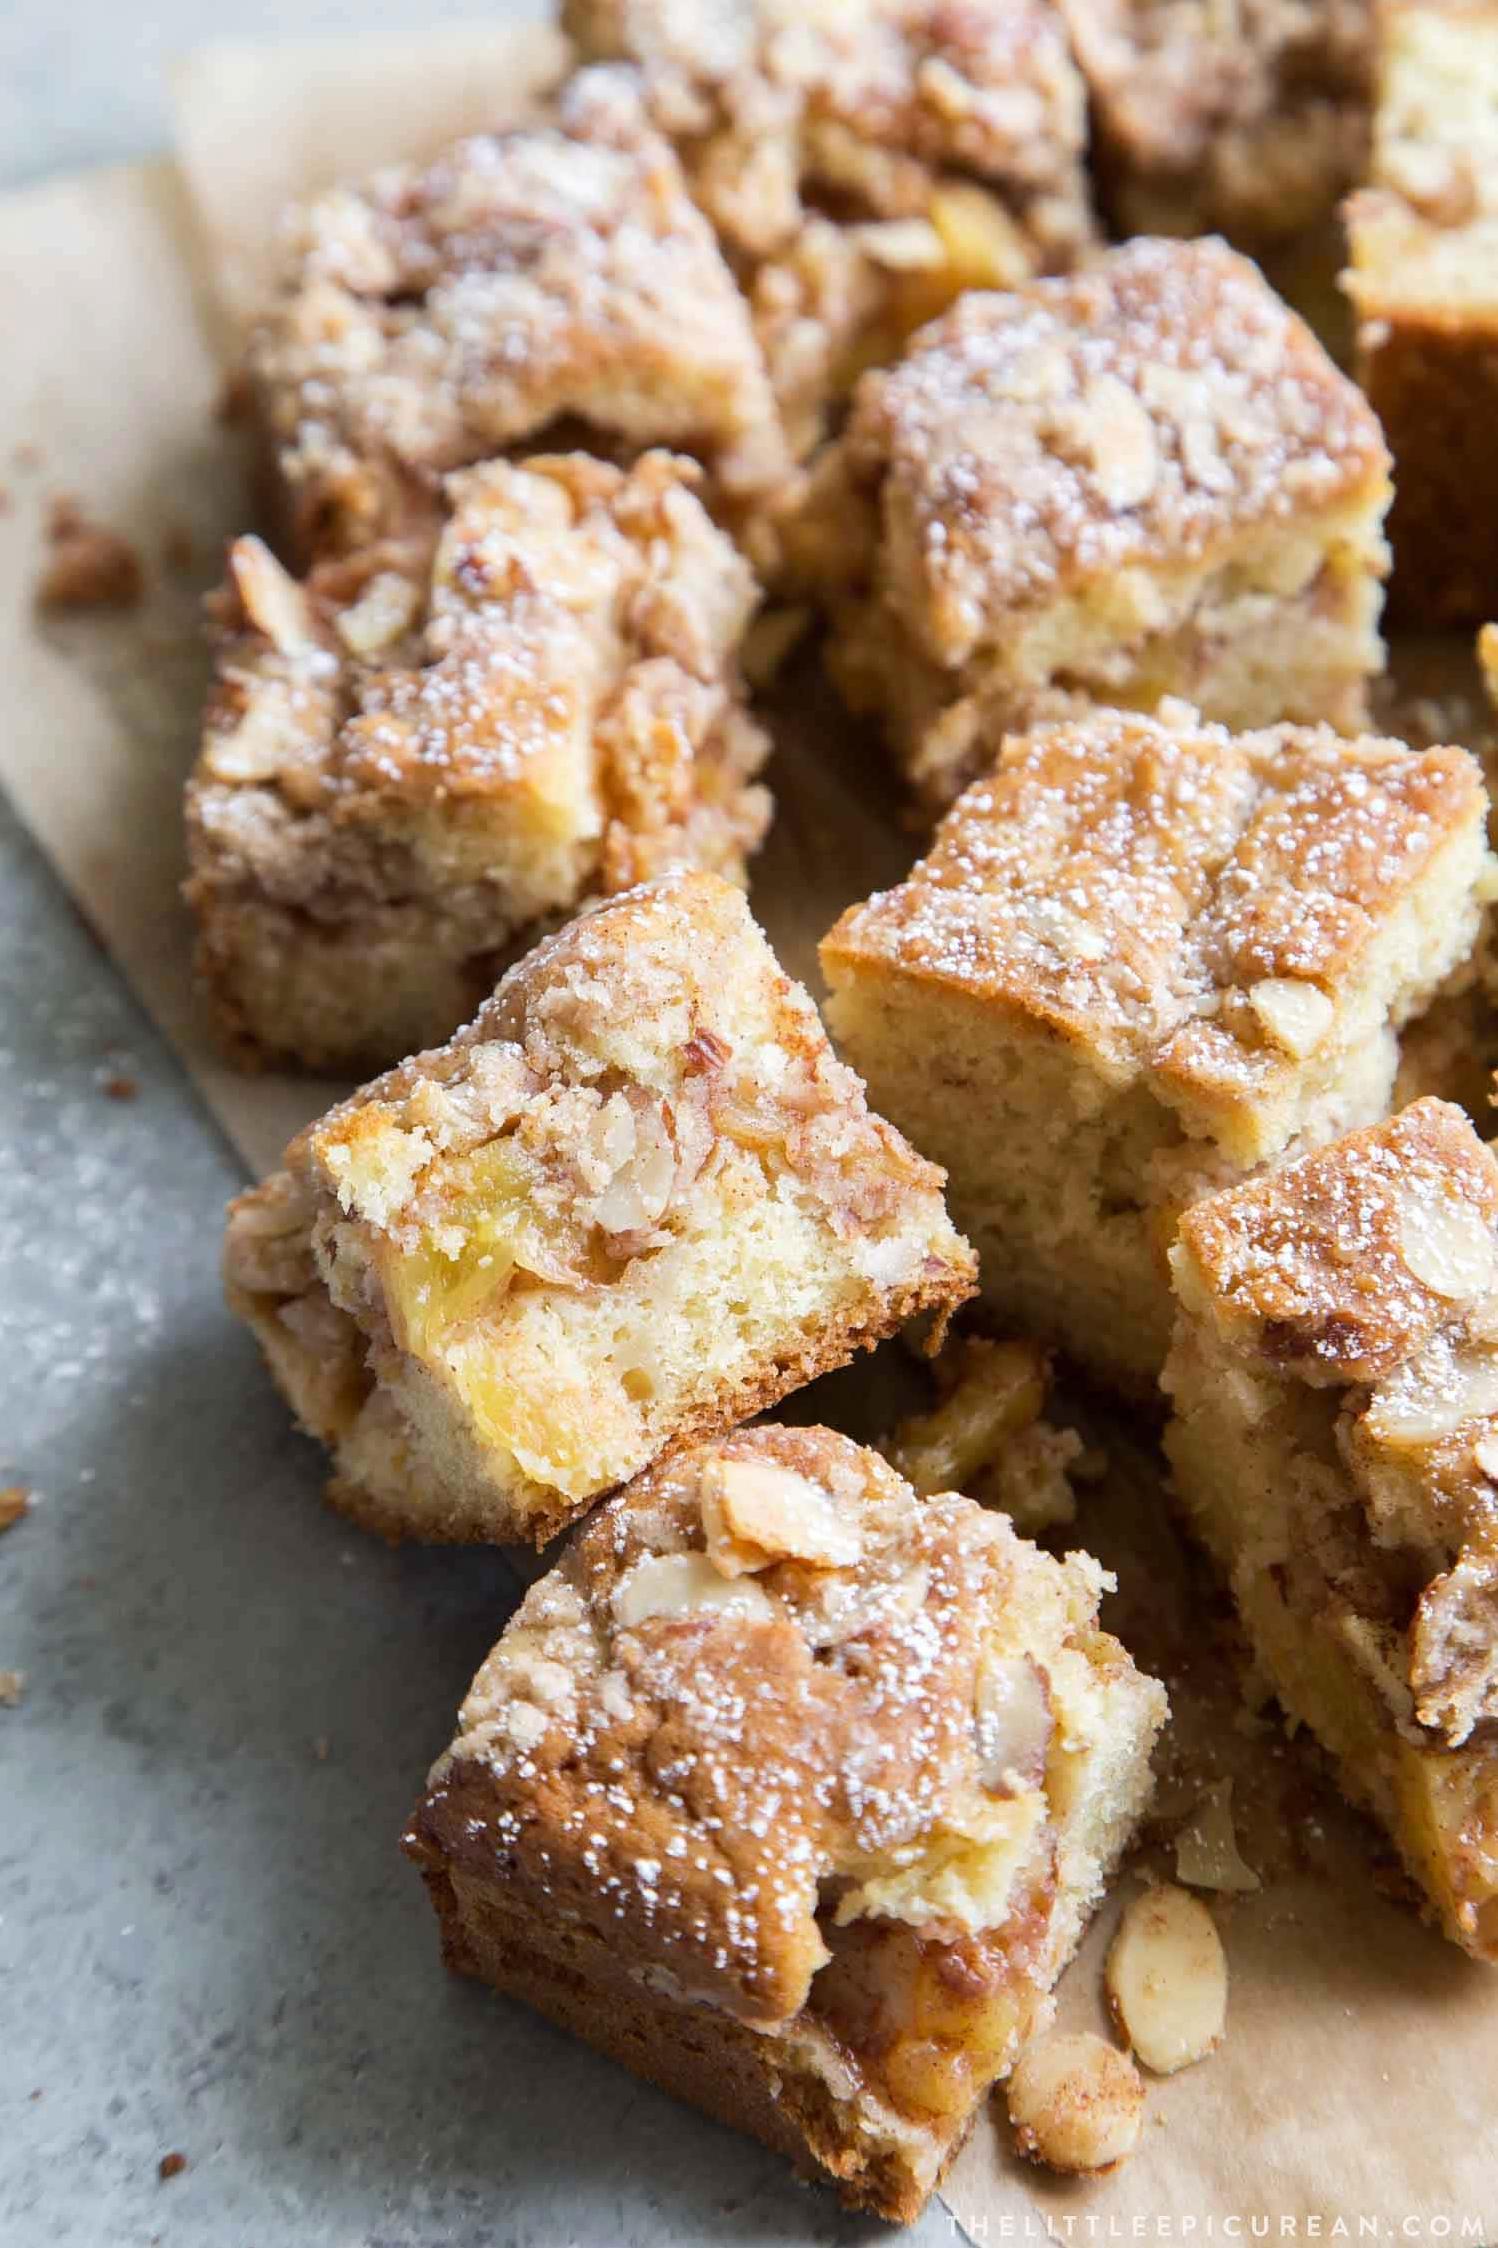 Delicious Pineapple Coffee Cake Recipe for Brunch